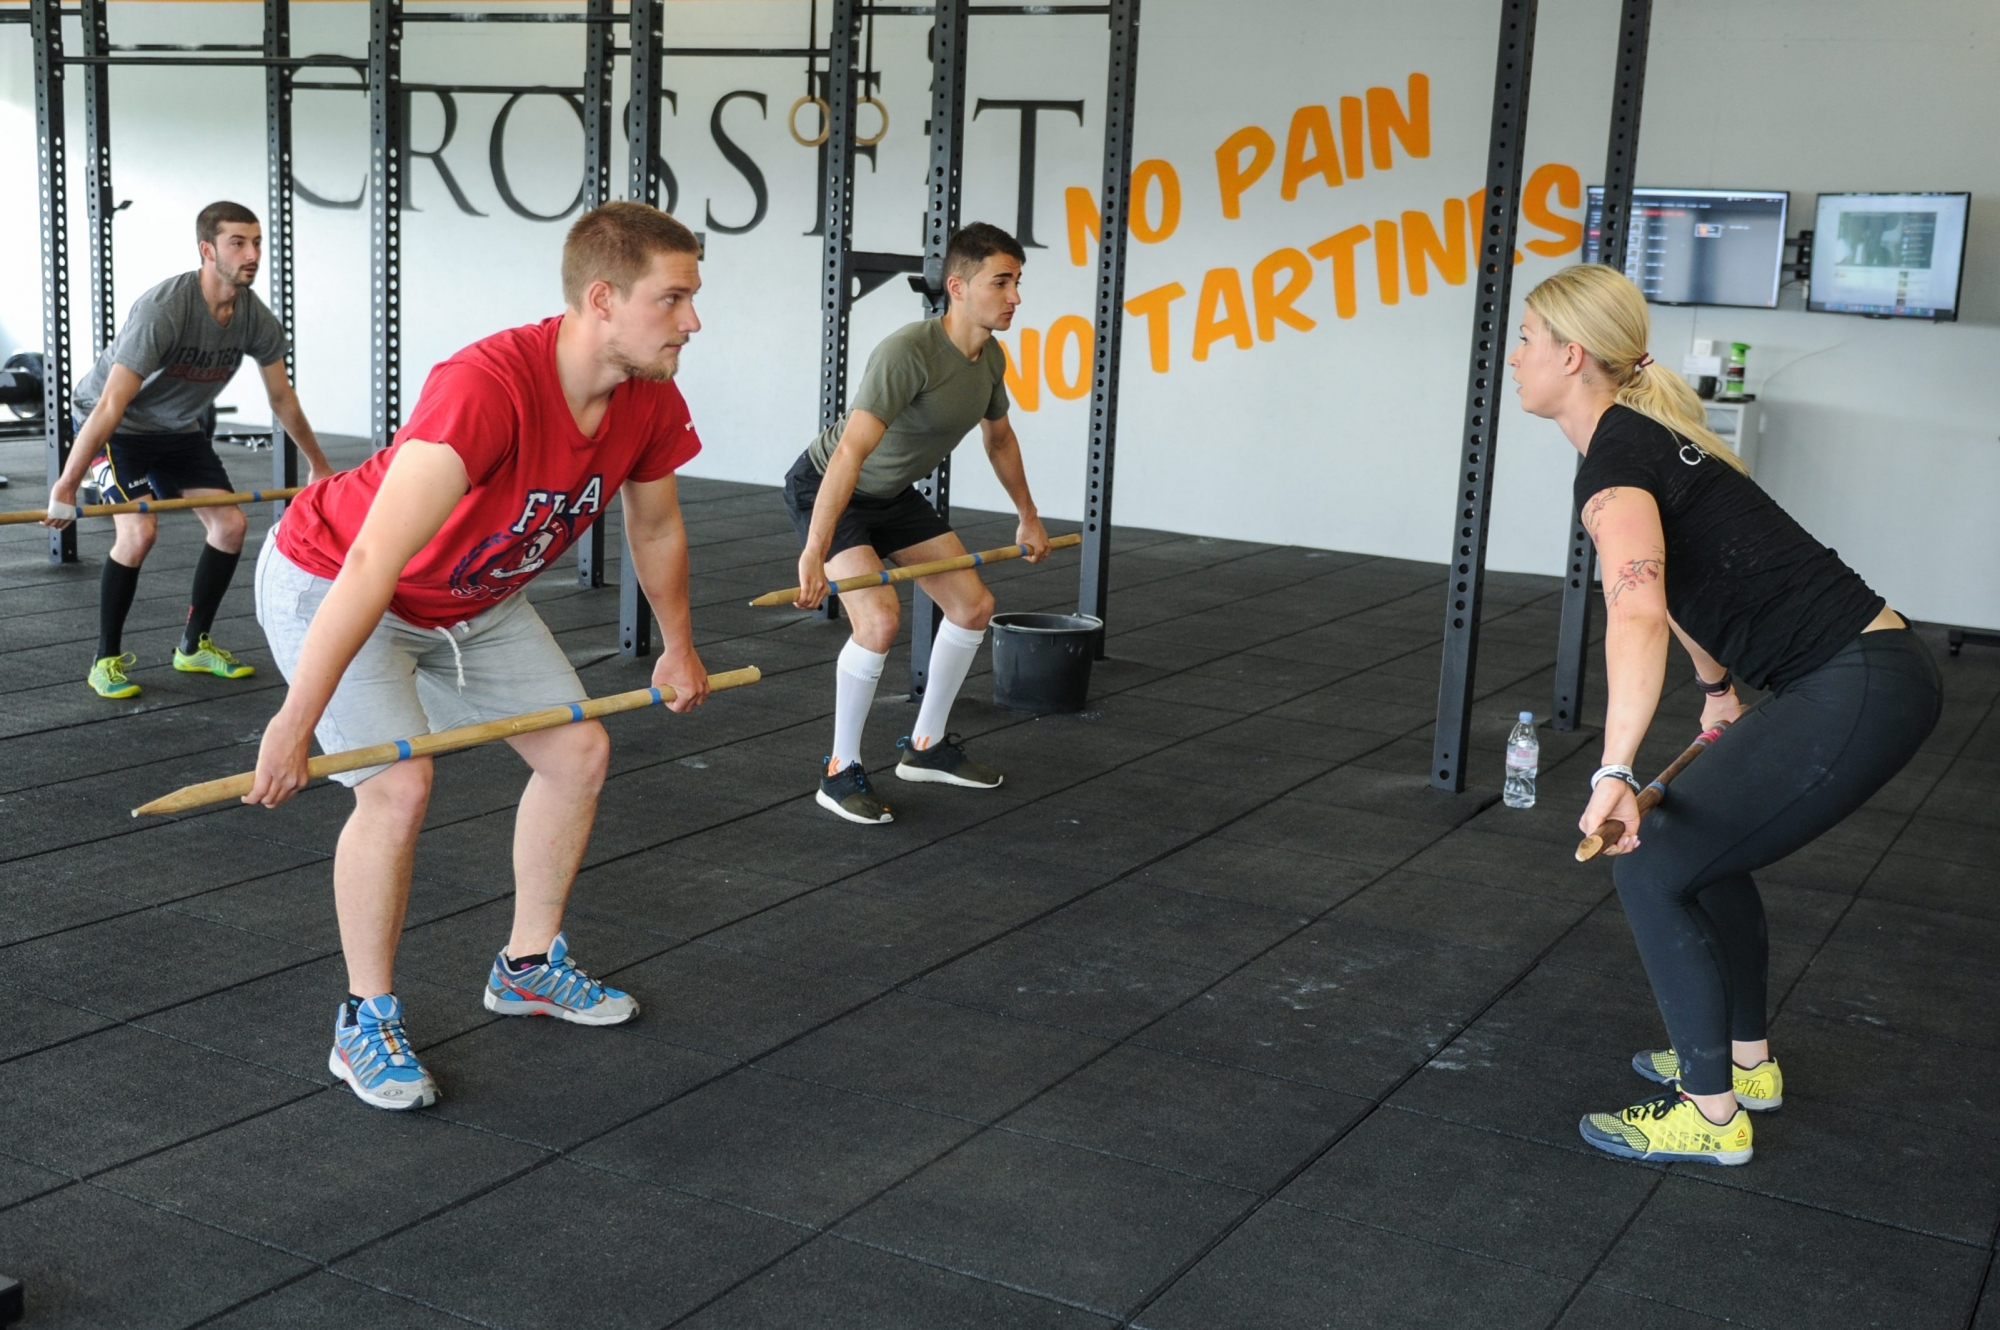 Crossfit, Marie Vogt, coach.

CRESSIER 18 04 2015
Photo: Christian Galley